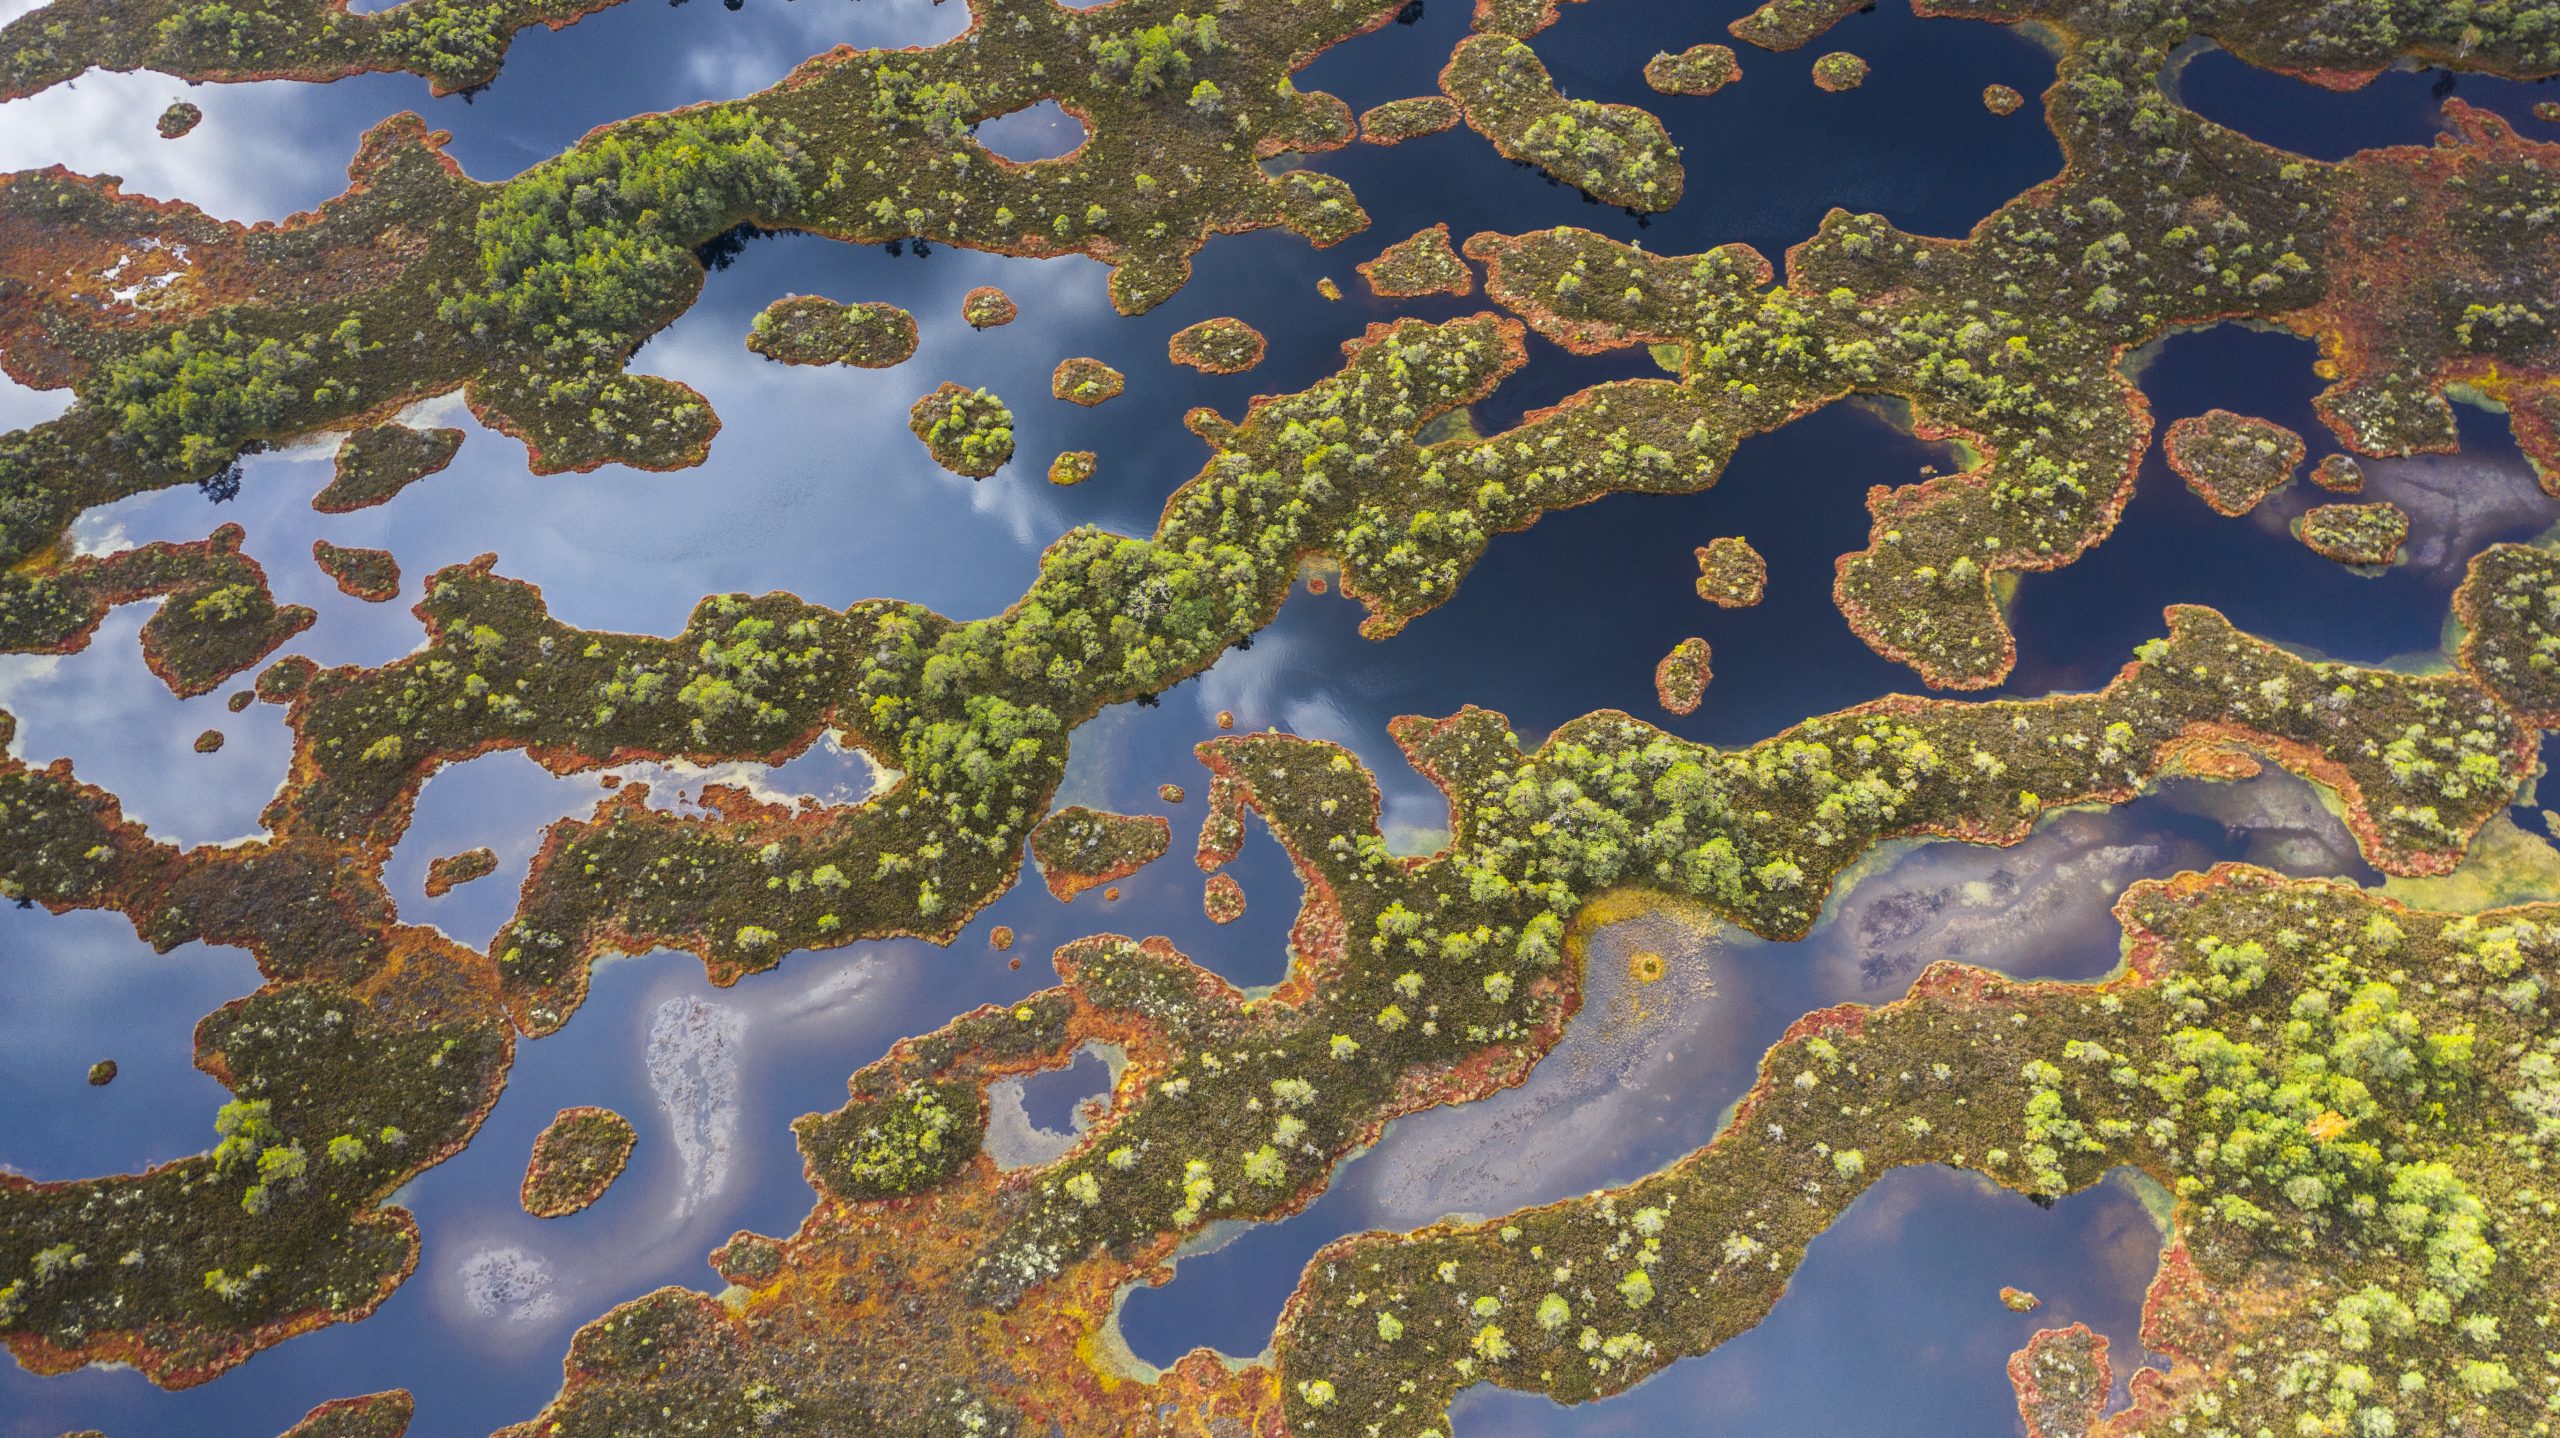 Aerial view over peat-bog landscape with the complex lake and  pool ridge patterns. in W-Estonia, Europe. Peatlands are important carbon deposits